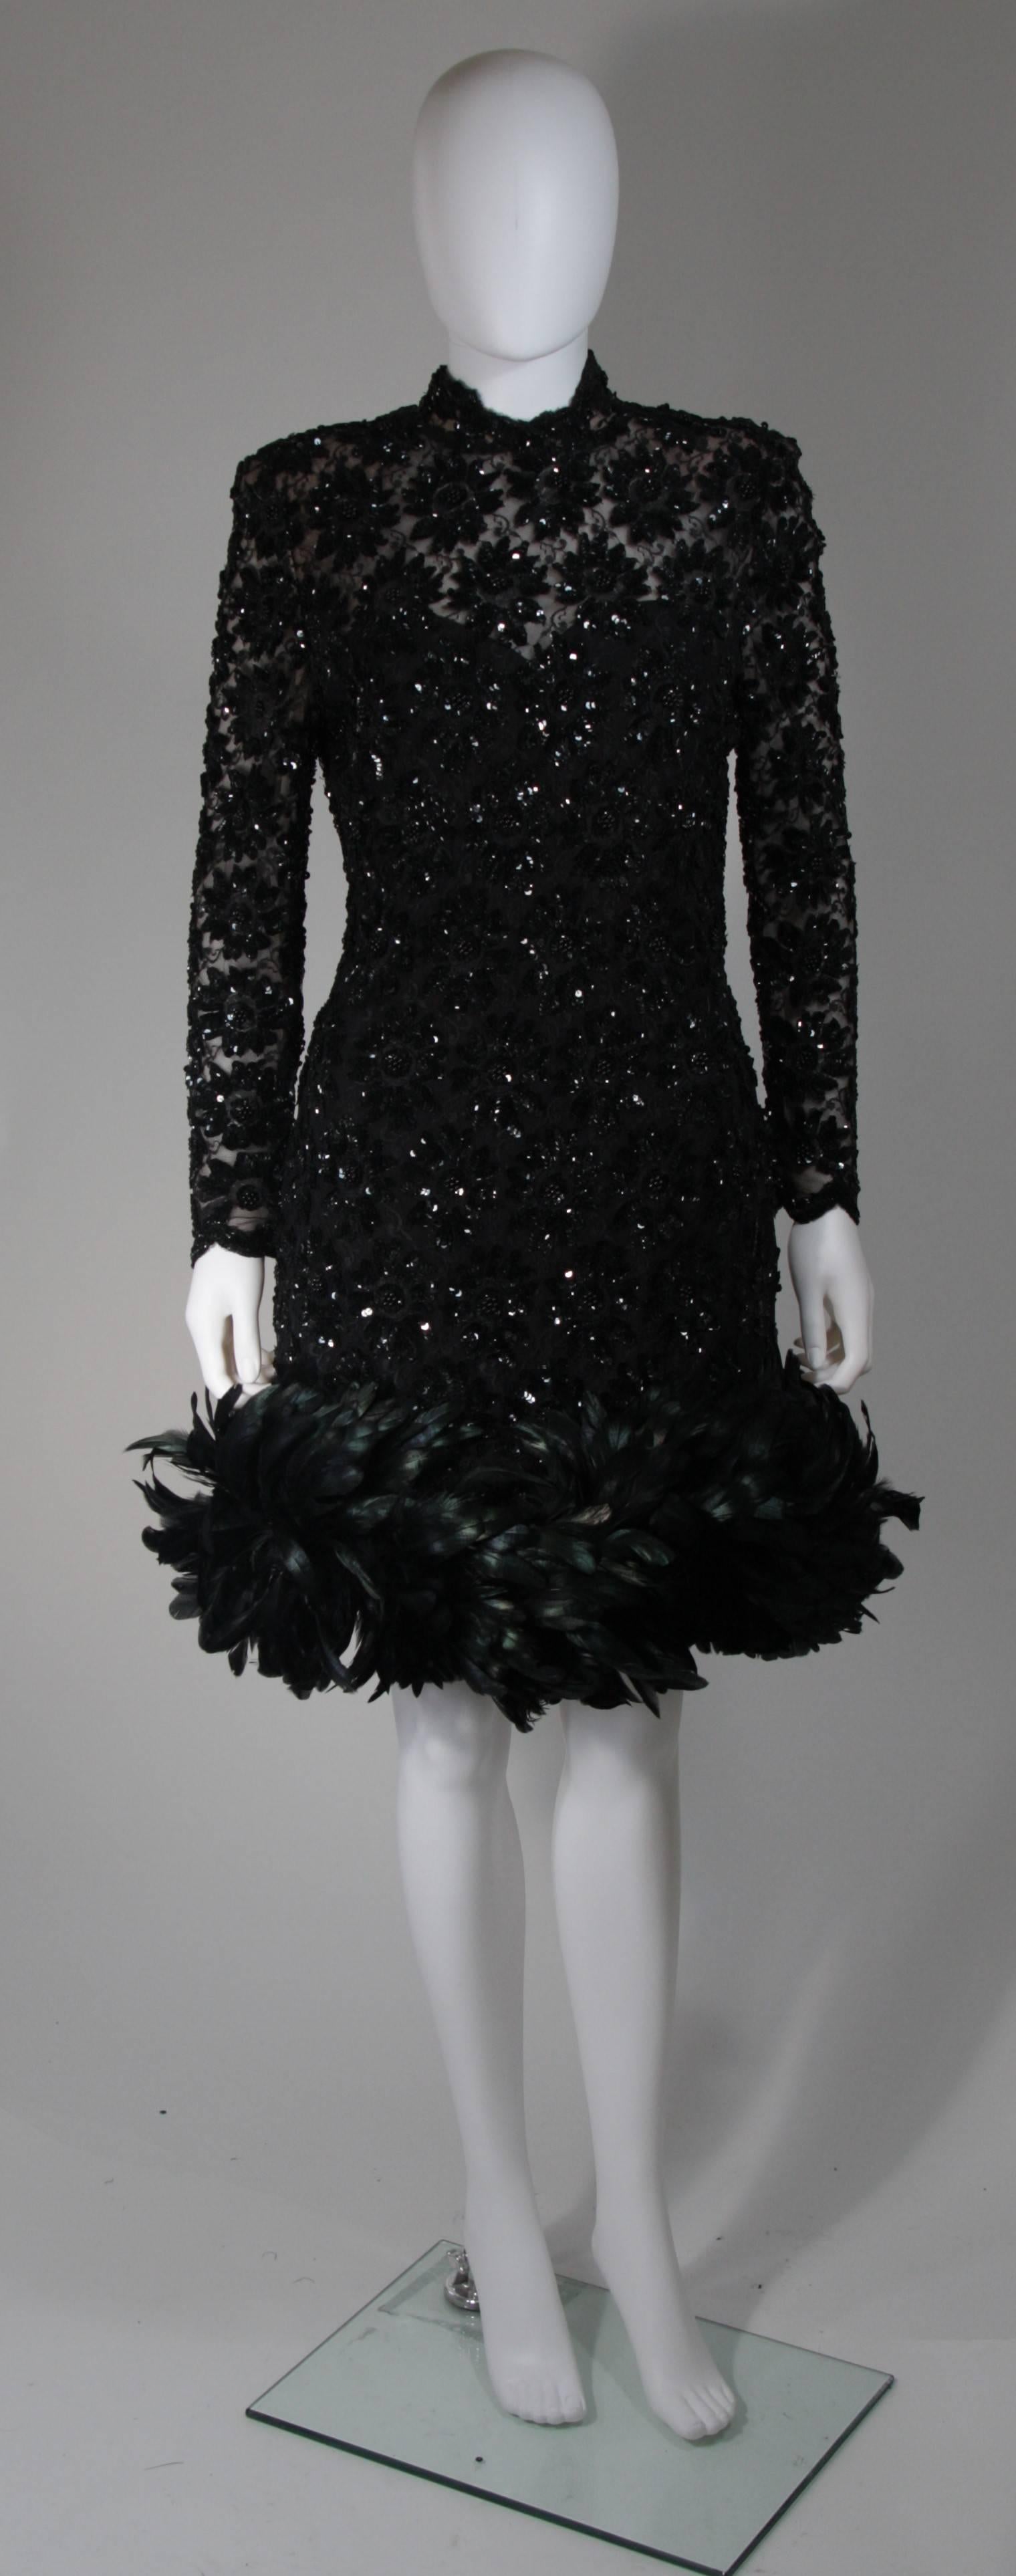 This Travilla cocktail dress is composed of an embellished lace, adorned with sequins and beading. There is a center back zipper. In excellent condition. Made in USA.

**Please cross-reference measurements for personal accuracy. The size listed in